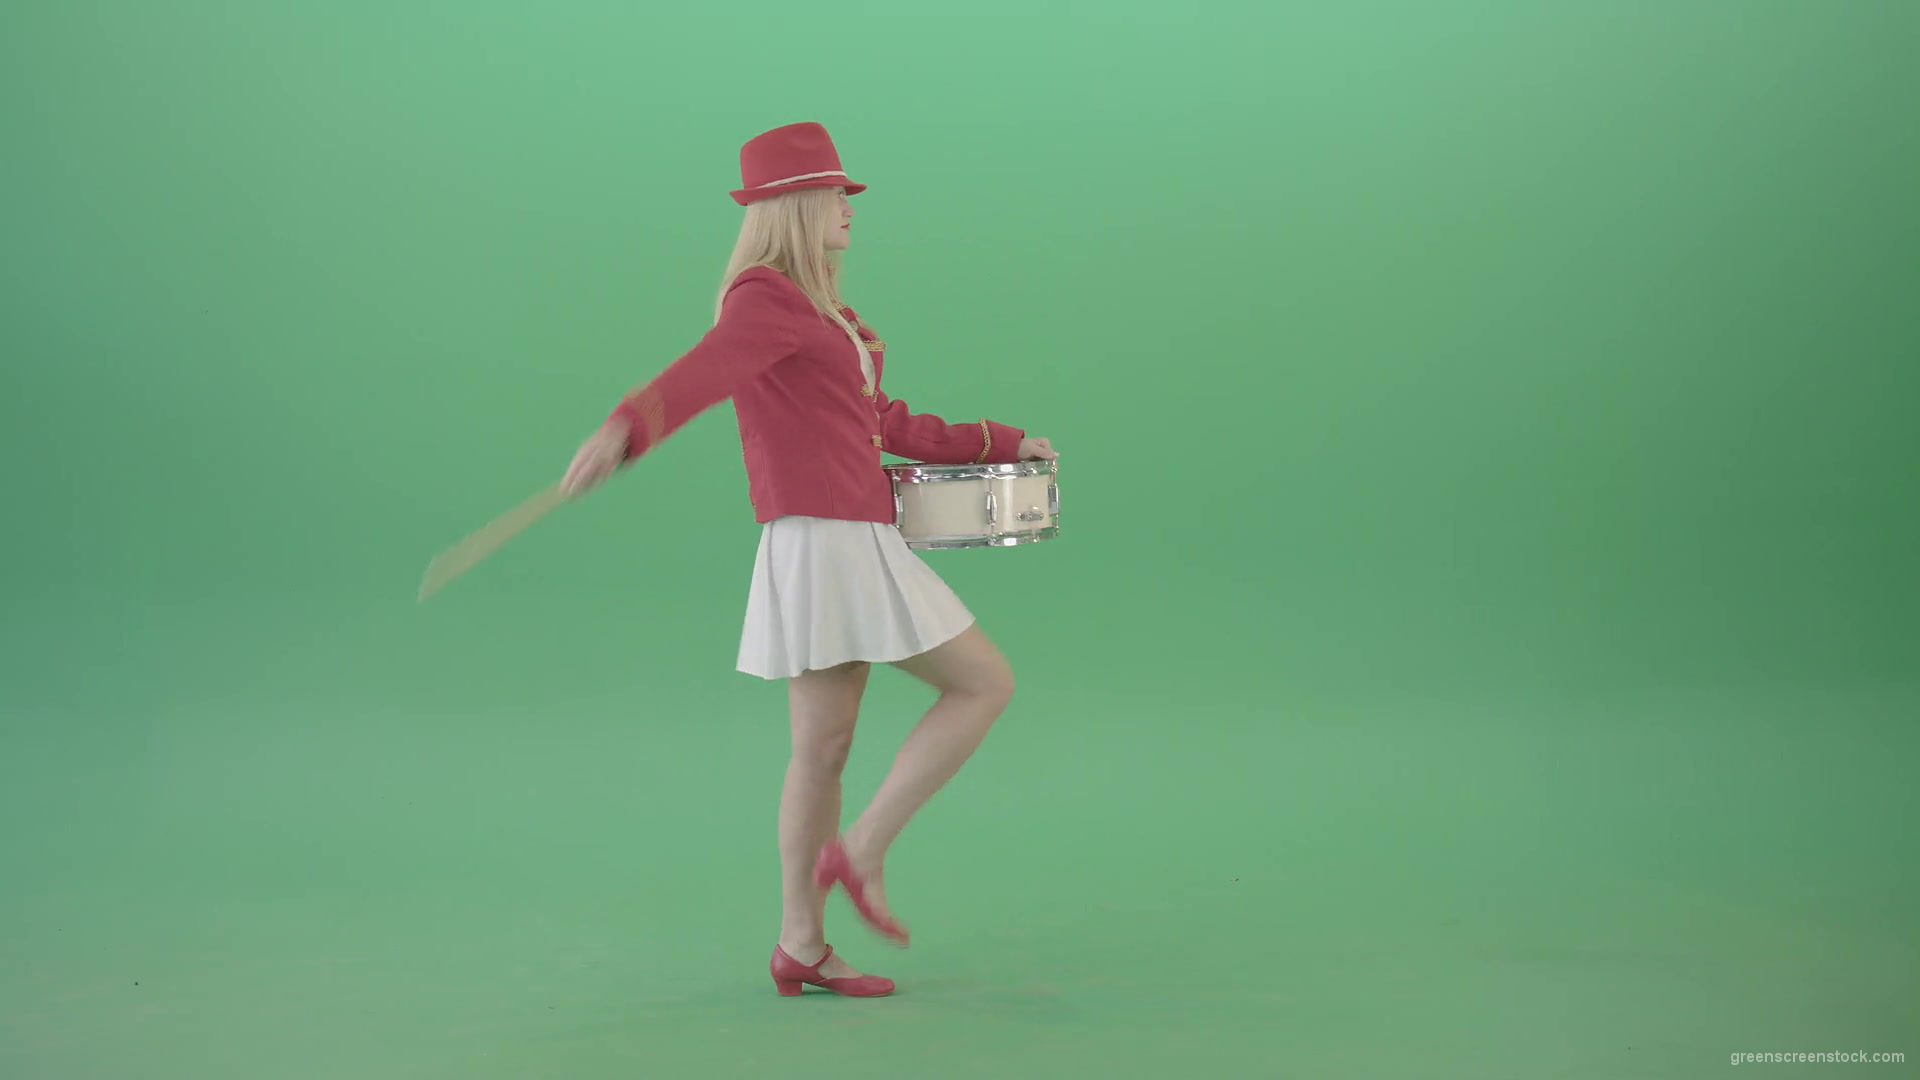 vj video background Side-view-marching-girl-play-white-snare-drum-in-red-uniform-on-green-screen-Video-Footage-1920_003